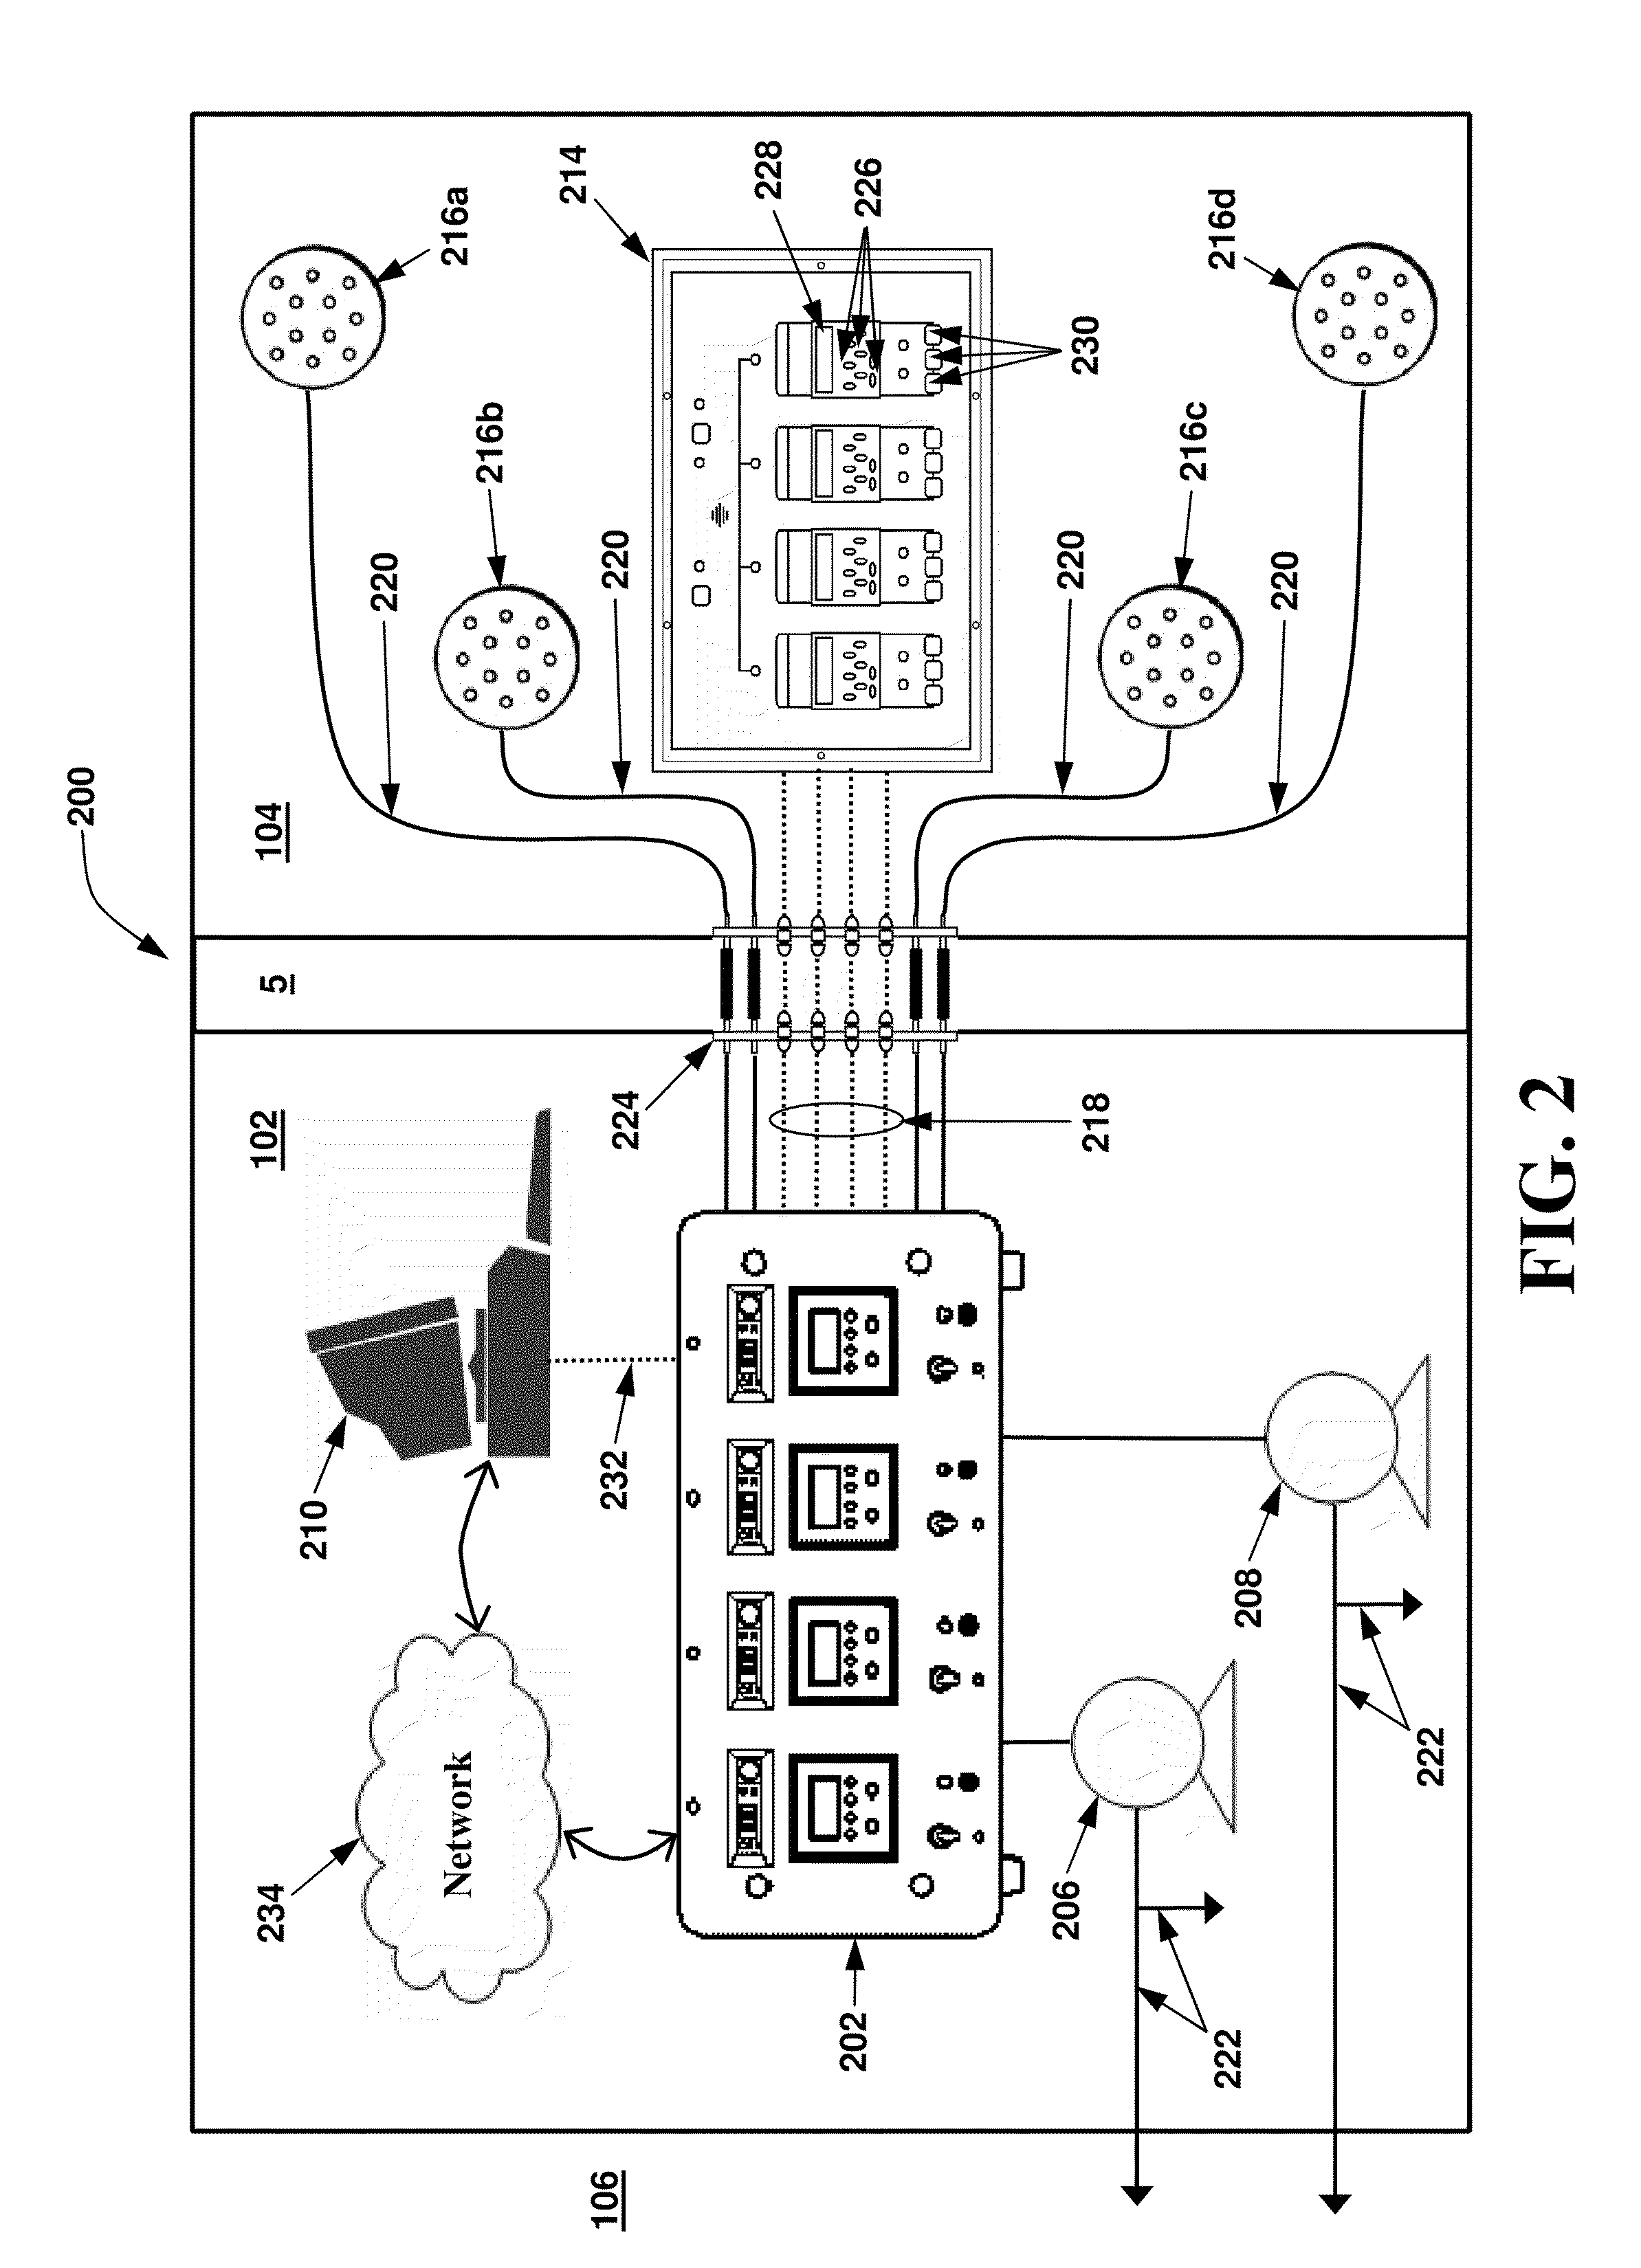 Air sampling system having a plurality of air sampling devices with their own flow switches